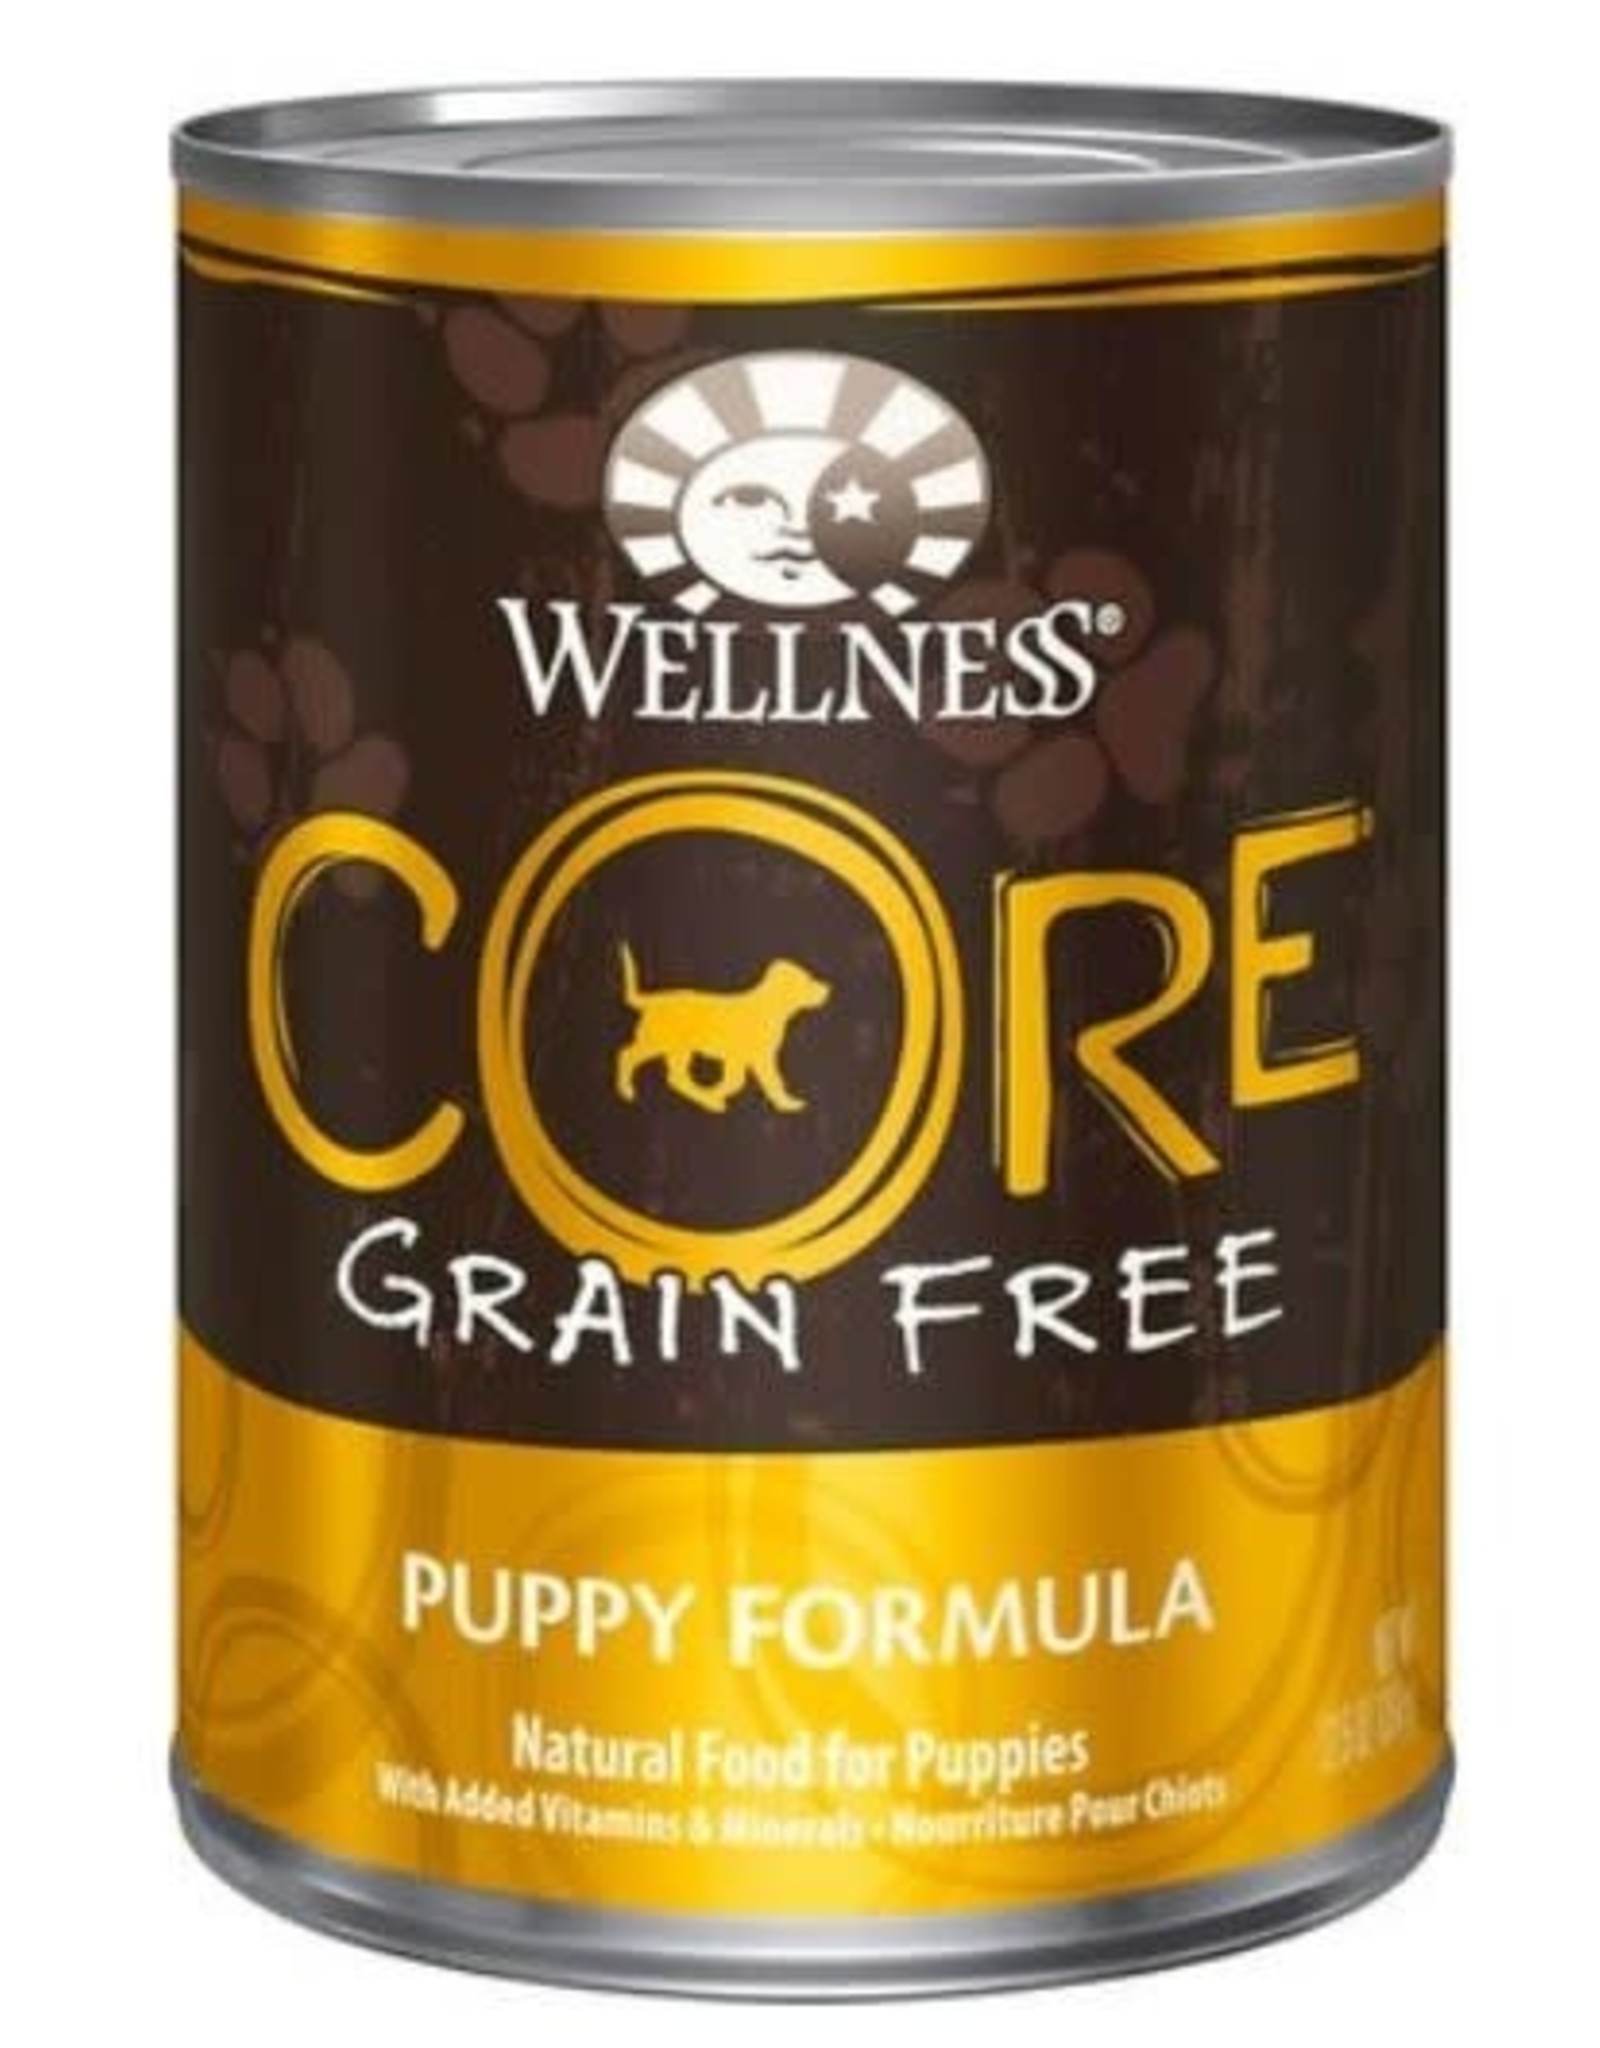 WELLNESS CORE PUPPY CAN 12.5 oz